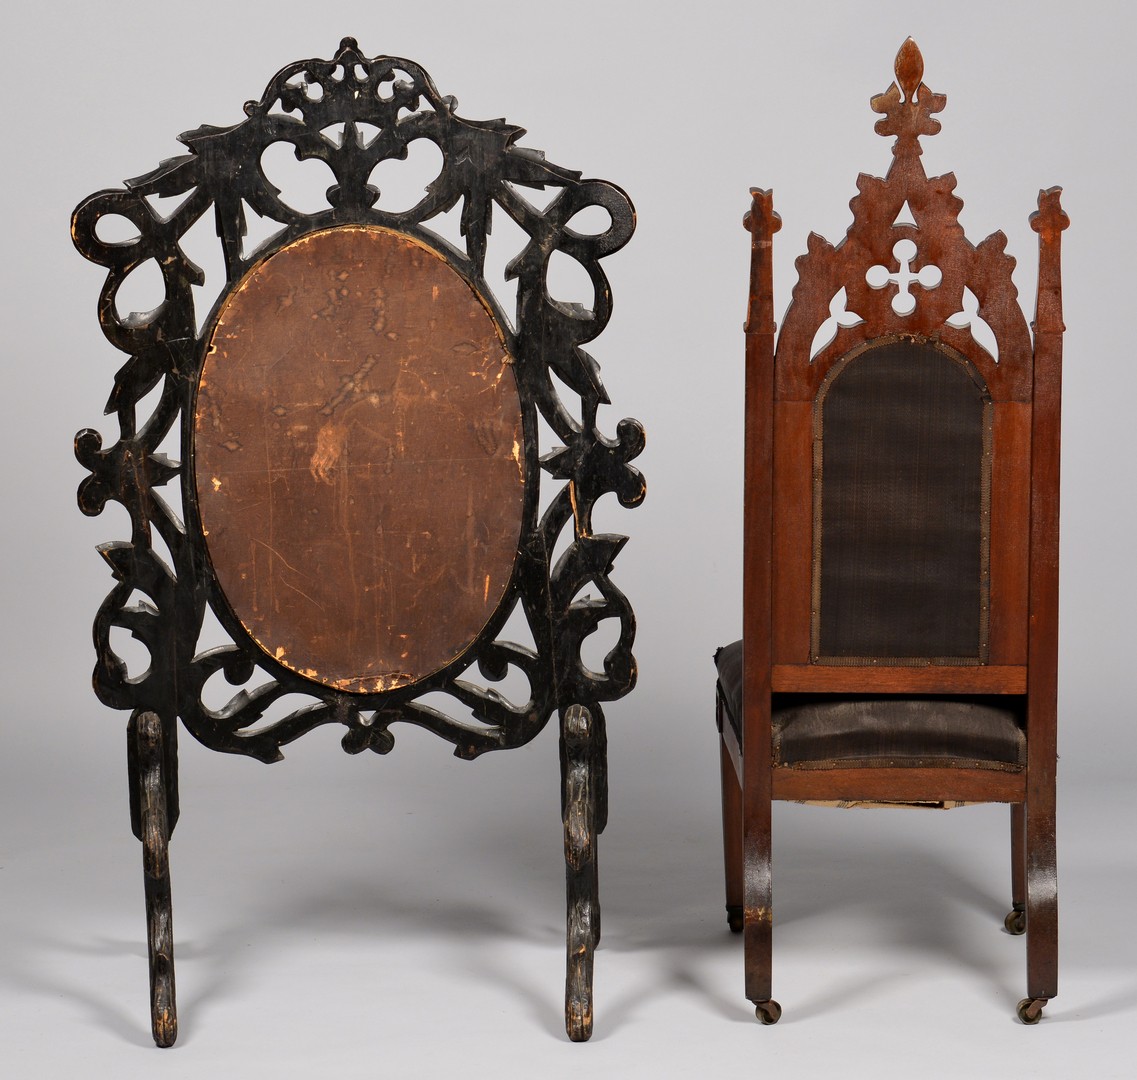 Lot 709: 2 American Gothic Furniture Items, Chair & Screen